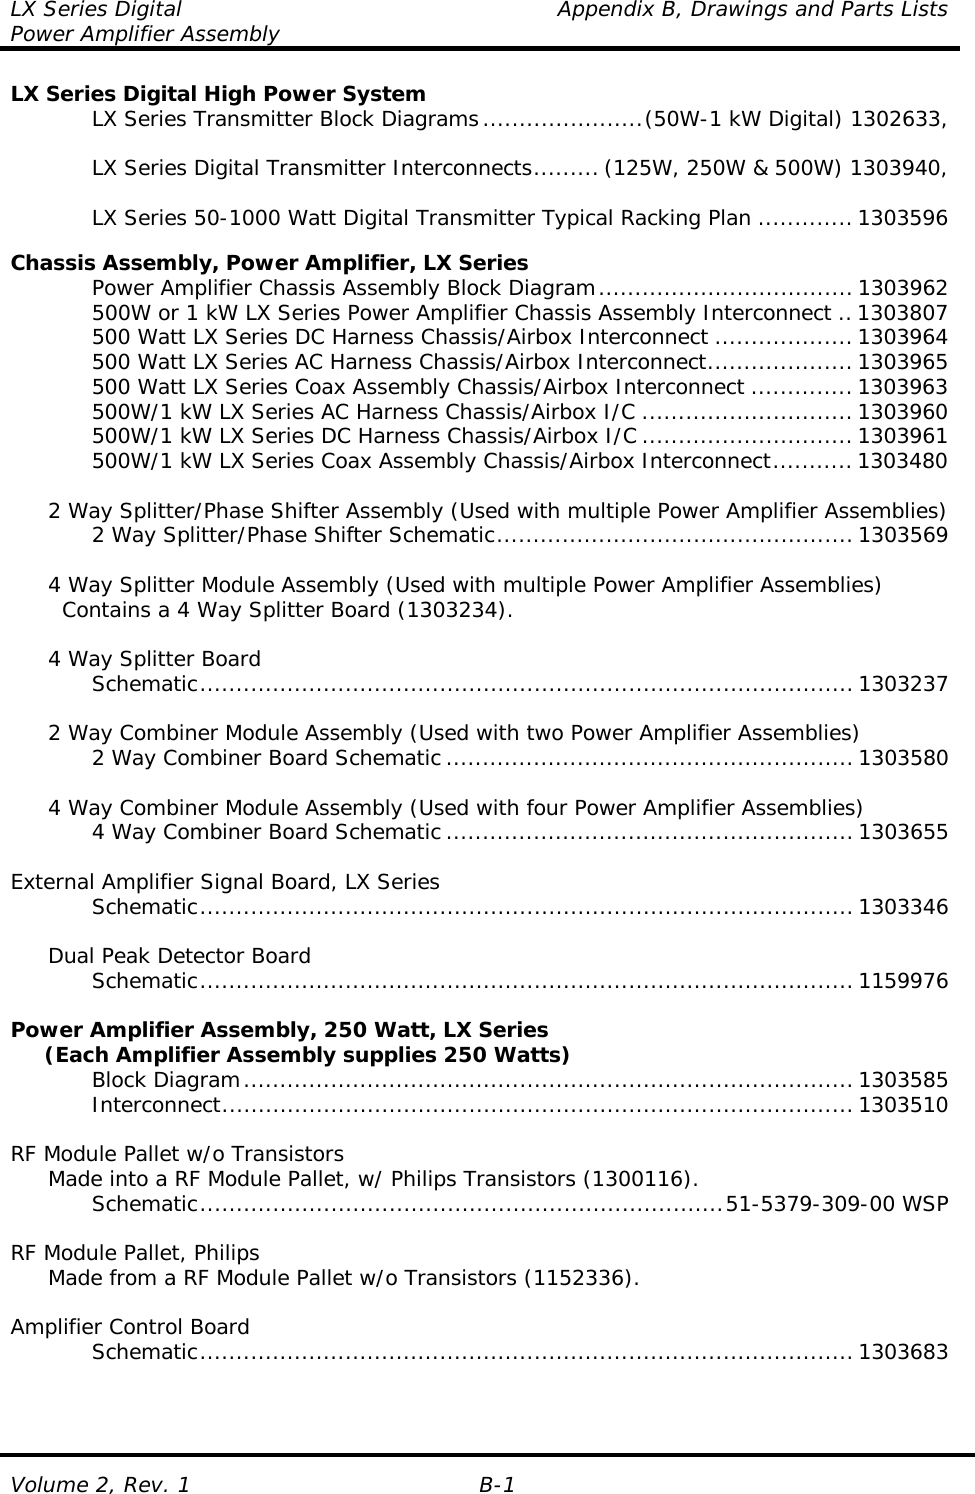 LX Series Digital    Appendix B, Drawings and Parts Lists Power Amplifier Assembly Volume 2, Rev. 1  B-1 LX Series Digital High Power System     LX Series Transmitter Block Diagrams......................(50W-1 kW Digital) 1302633,       LX Series Digital Transmitter Interconnects......... (125W, 250W &amp; 500W) 1303940,      LX Series 50-1000 Watt Digital Transmitter Typical Racking Plan ............. 1303596  Chassis Assembly, Power Amplifier, LX Series     Power Amplifier Chassis Assembly Block Diagram................................... 1303962     500W or 1 kW LX Series Power Amplifier Chassis Assembly Interconnect ..1303807     500 Watt LX Series DC Harness Chassis/Airbox Interconnect ...................1303964     500 Watt LX Series AC Harness Chassis/Airbox Interconnect.................... 1303965     500 Watt LX Series Coax Assembly Chassis/Airbox Interconnect ..............1303963     500W/1 kW LX Series AC Harness Chassis/Airbox I/C ............................. 1303960     500W/1 kW LX Series DC Harness Chassis/Airbox I/C ............................. 1303961     500W/1 kW LX Series Coax Assembly Chassis/Airbox Interconnect........... 1303480    2 Way Splitter/Phase Shifter Assembly (Used with multiple Power Amplifier Assemblies)     2 Way Splitter/Phase Shifter Schematic.................................................1303569    4 Way Splitter Module Assembly (Used with multiple Power Amplifier Assemblies)     Contains a 4 Way Splitter Board (1303234).    4 Way Splitter Board    Schematic.......................................................................................... 1303237    2 Way Combiner Module Assembly (Used with two Power Amplifier Assemblies)     2 Way Combiner Board Schematic ........................................................ 1303580    4 Way Combiner Module Assembly (Used with four Power Amplifier Assemblies)     4 Way Combiner Board Schematic ........................................................ 1303655  External Amplifier Signal Board, LX Series    Schematic.......................................................................................... 1303346    Dual Peak Detector Board    Schematic.......................................................................................... 1159976  Power Amplifier Assembly, 250 Watt, LX Series      (Each Amplifier Assembly supplies 250 Watts)    Block Diagram.................................................................................... 1303585    Interconnect....................................................................................... 1303510  RF Module Pallet w/o Transistors   Made into a RF Module Pallet, w/ Philips Transistors (1300116).    Schematic........................................................................51-5379-309-00 WSP  RF Module Pallet, Philips   Made from a RF Module Pallet w/o Transistors (1152336).  Amplifier Control Board    Schematic.......................................................................................... 1303683    